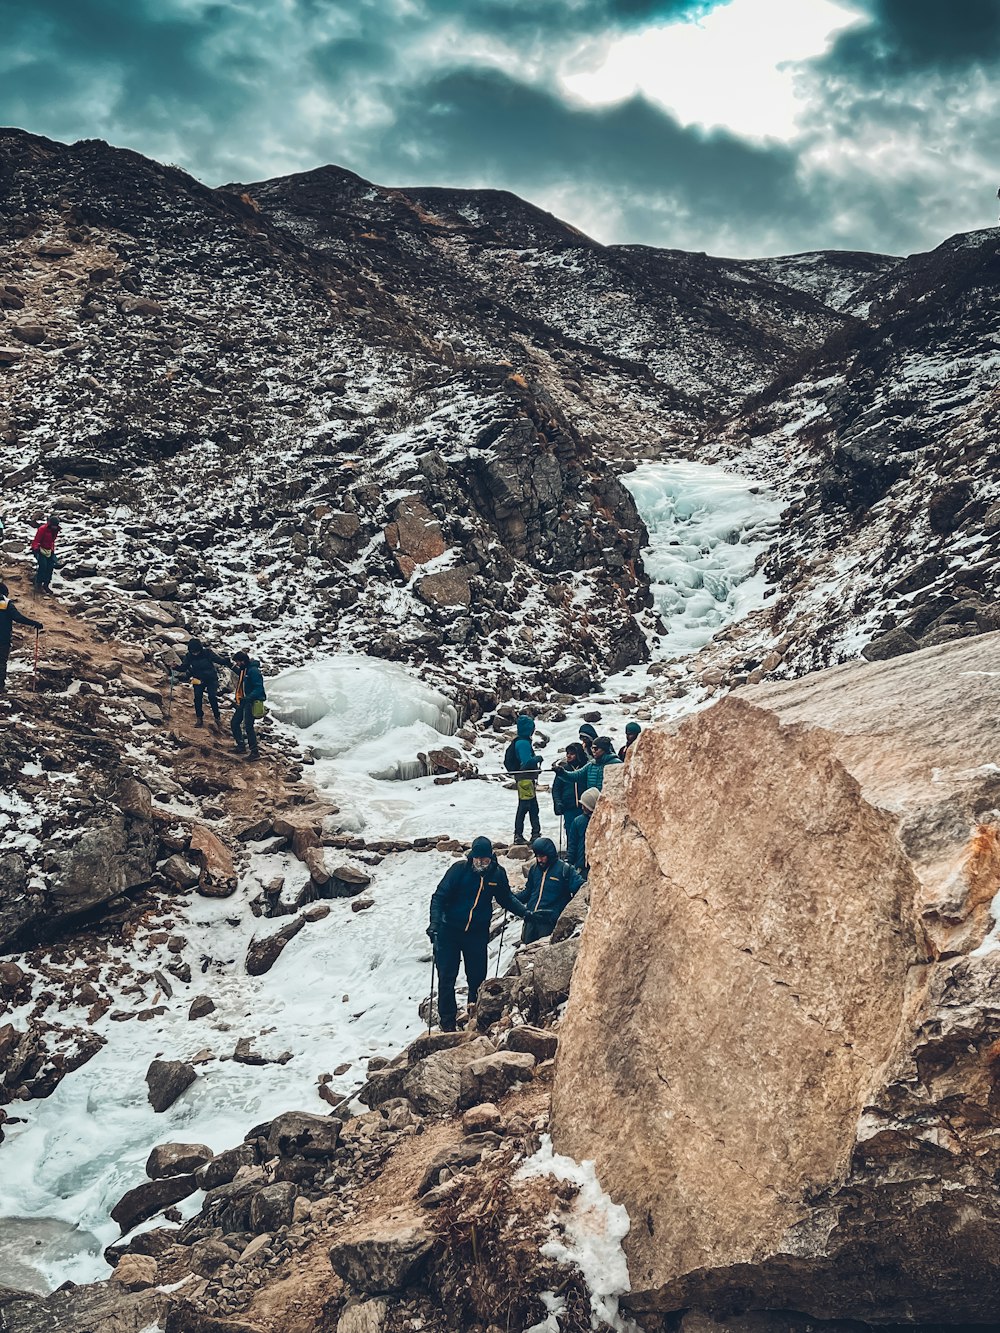 a group of people climbing up a snowy mountain